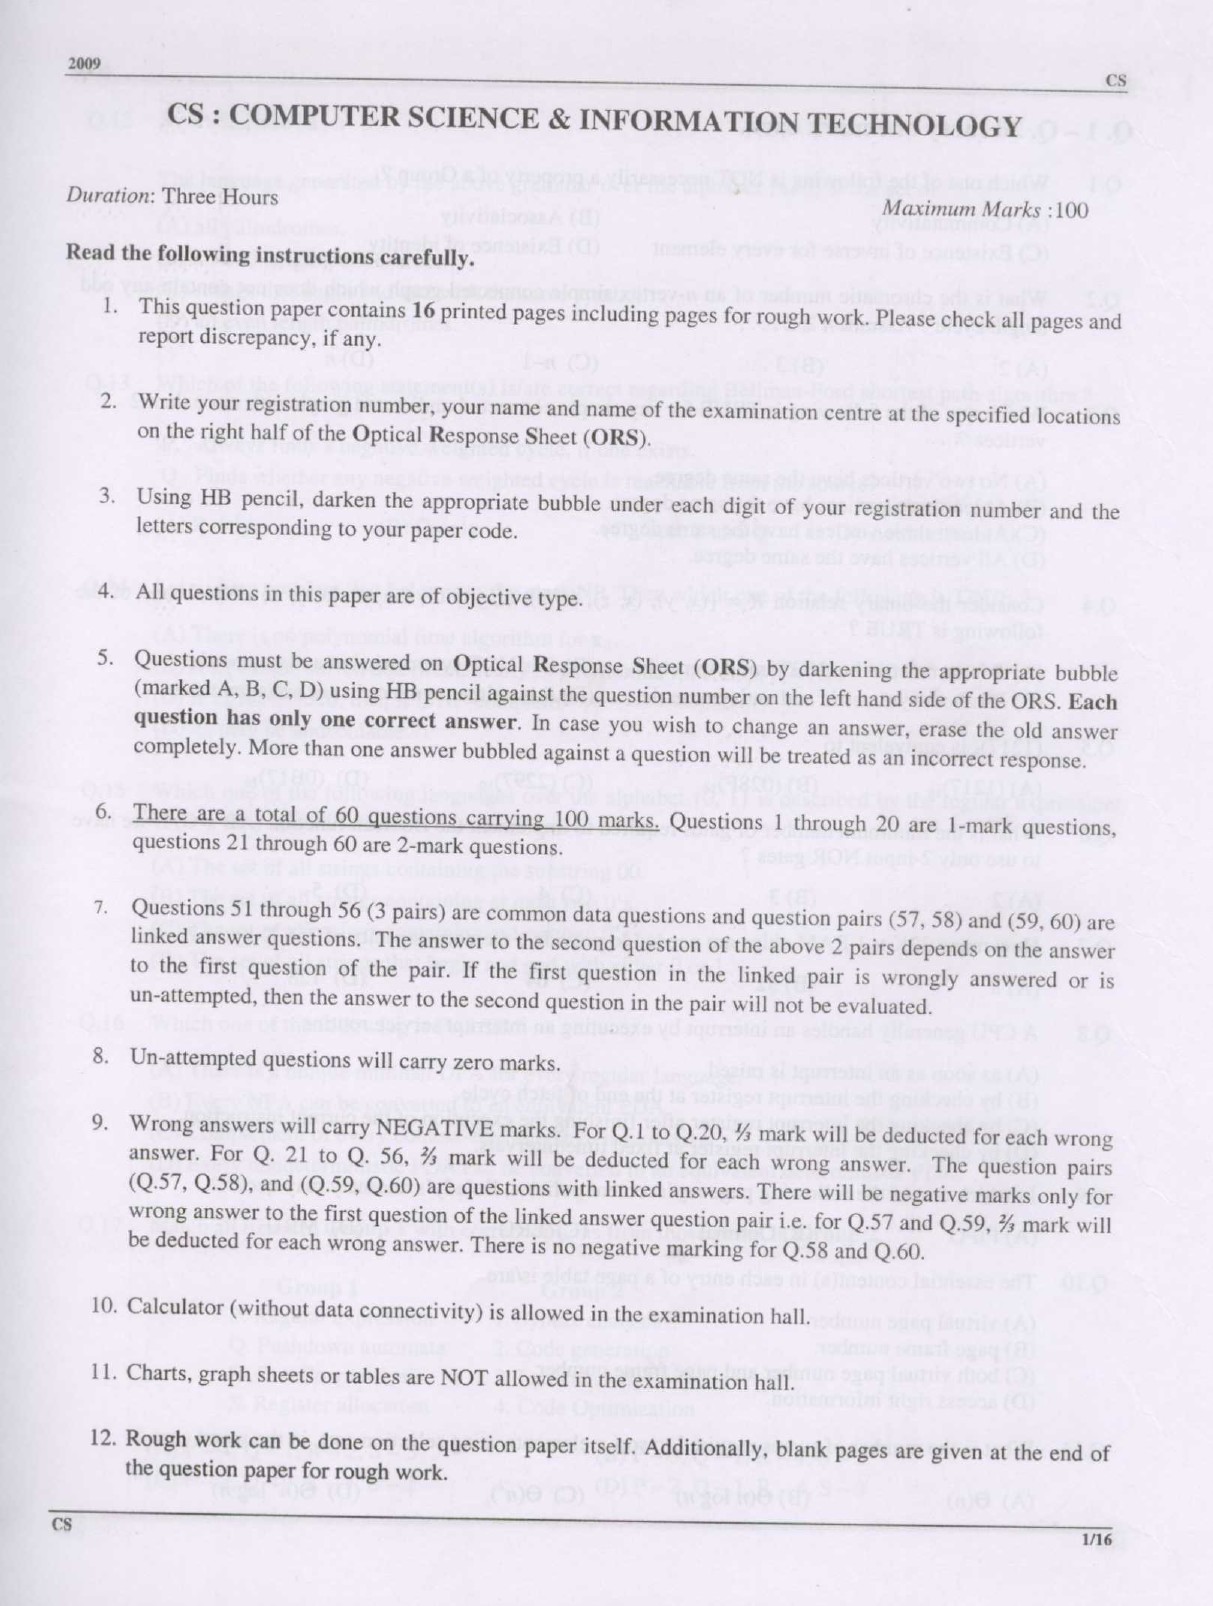 GATE Exam Question Paper 2009 Computer Science and Information Technology 1